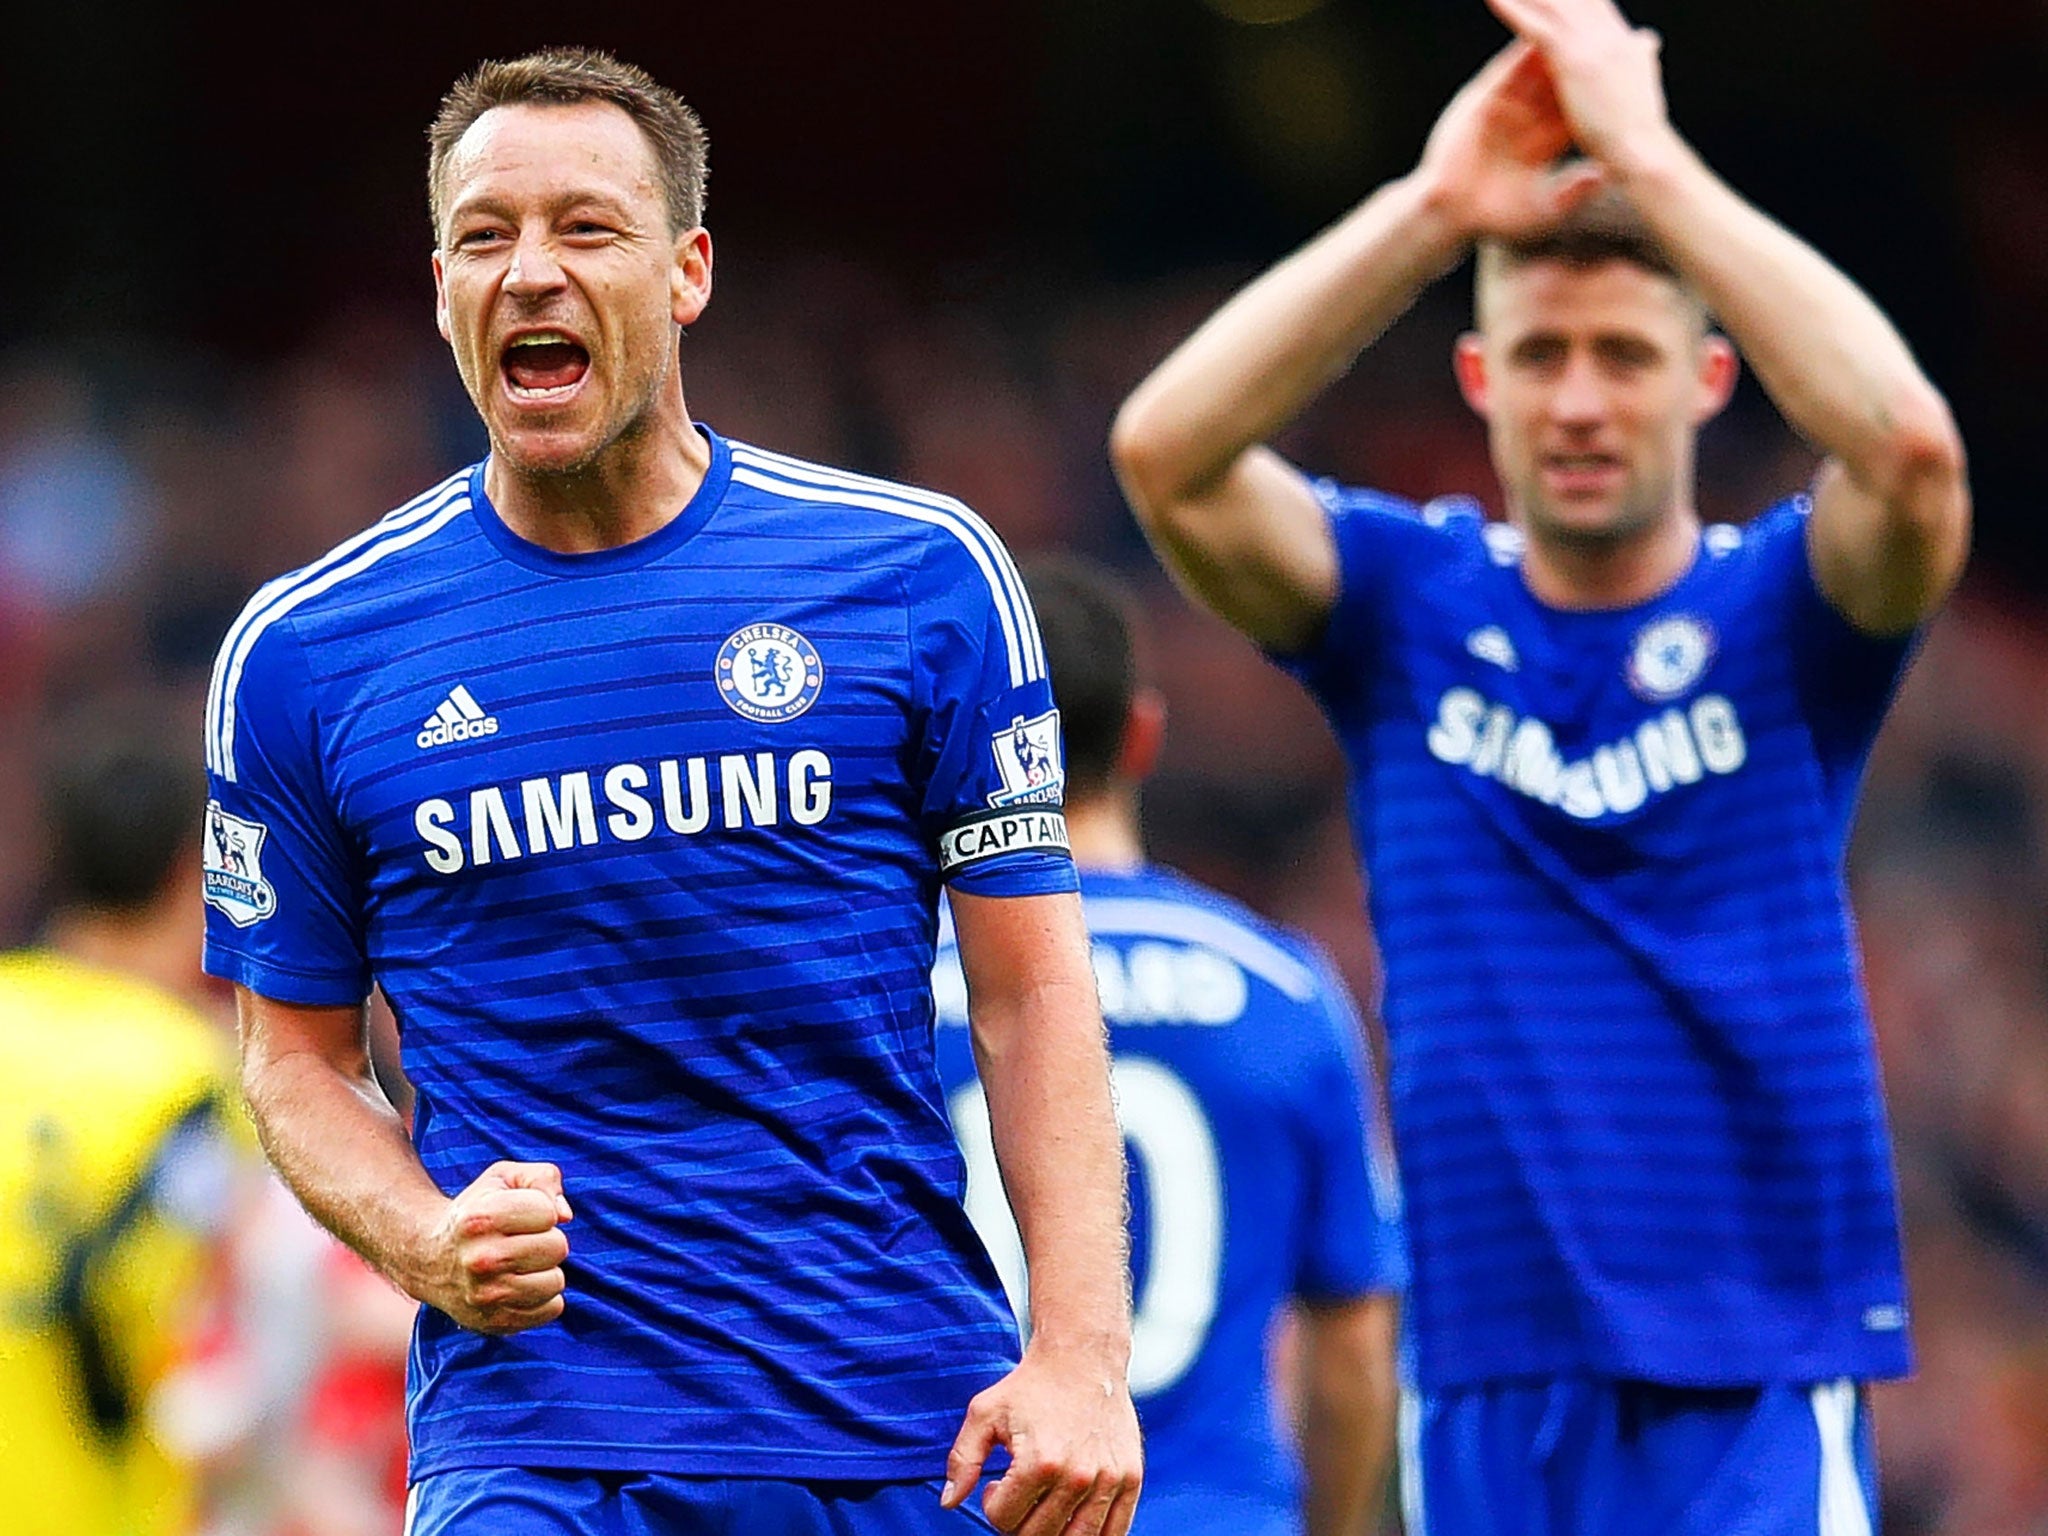 John Terry (left) and Gary Cahill celebrate after the draw at Arsenal which put Chelsea one step closer to the Premier League title